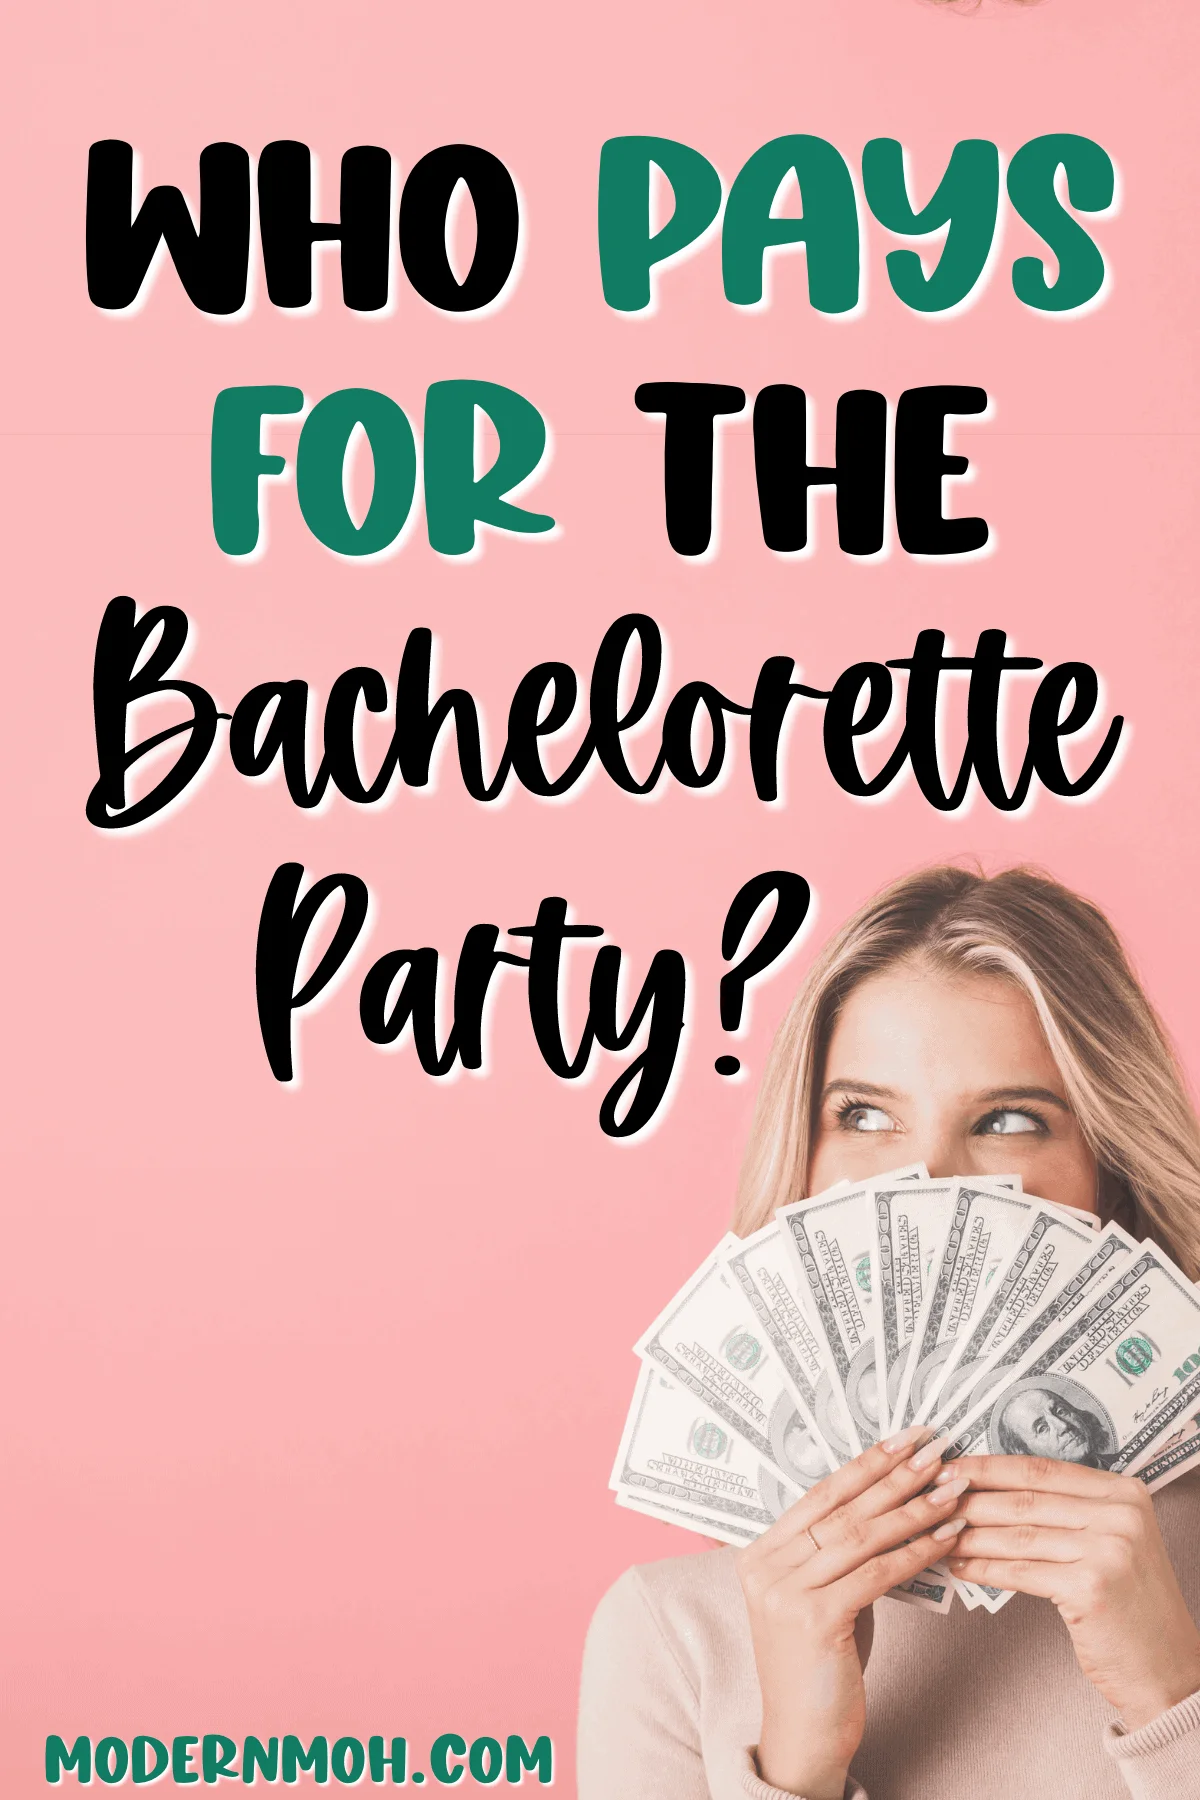 Who Pays for the Bachelorette Party?